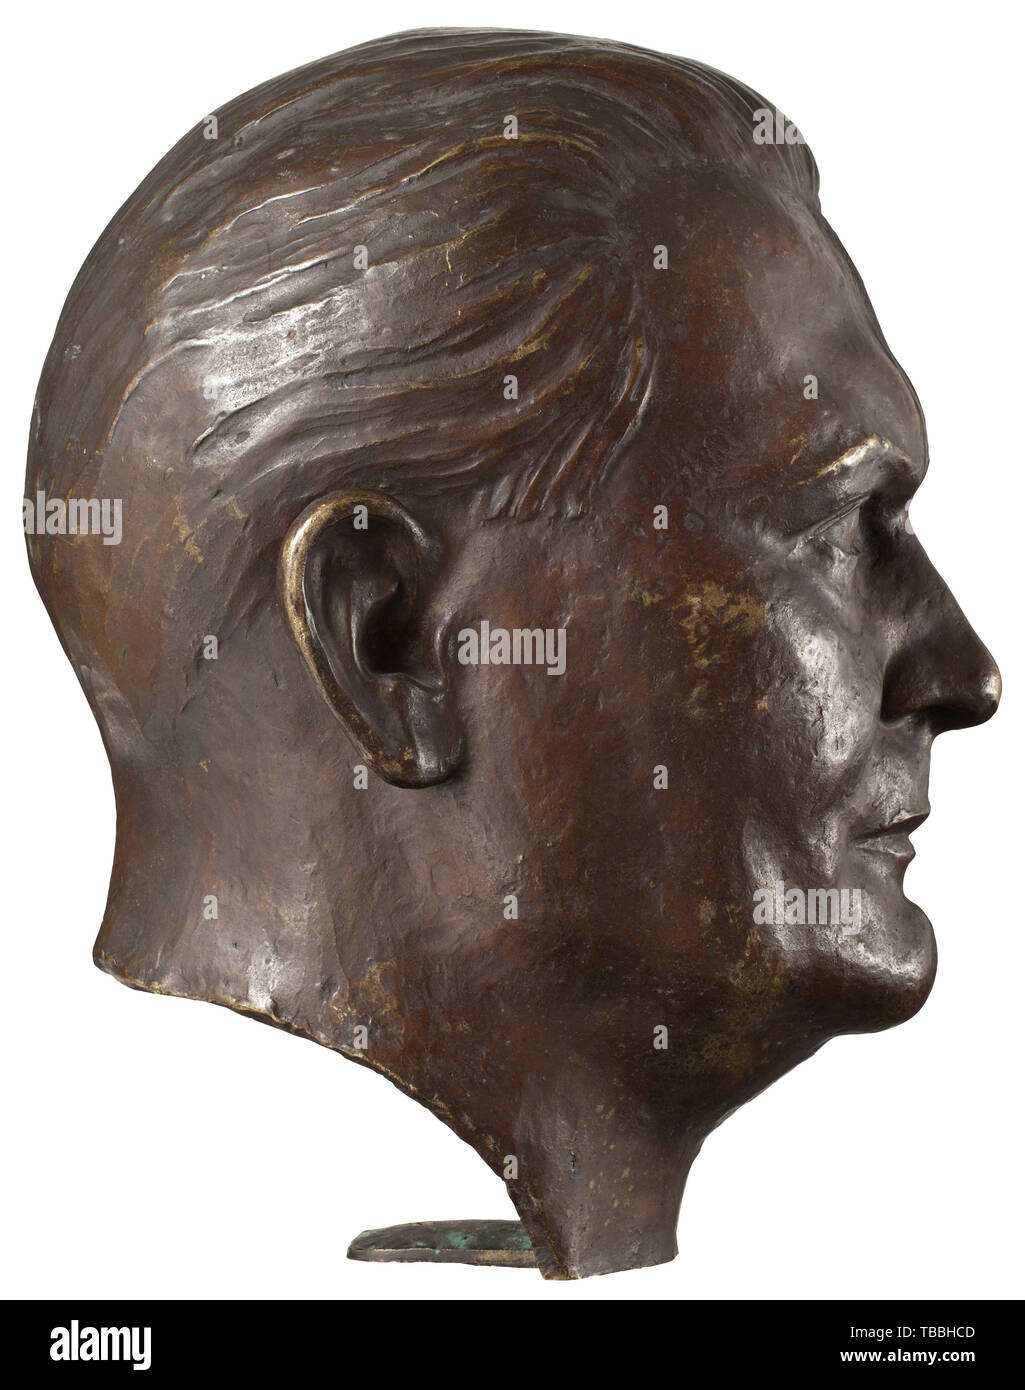 Hans Haffenrichter (1897 - 1981) - a bust of Hermann Göring Sculpted bronze head (without base), signed 'Haffenrichter' on the right edge of the neck, the base plate with foundry stamp 'H. Noack Berlin Friedenau'. Height 37 cm. Haffenrichter was a versatile and sought-after artist. Apart from sculptures he created drawings, watercolours and paintings. His works were displayed at the Great German Art Exhibitions in 1939, 1941 and 1943. historic, historical, 20th century, 1930s, 1940s, fine arts, art, NS, National Socialism, Nazism, Third Reich, German Reich, Germany, Nationa, Editorial-Use-Only Stock Photo